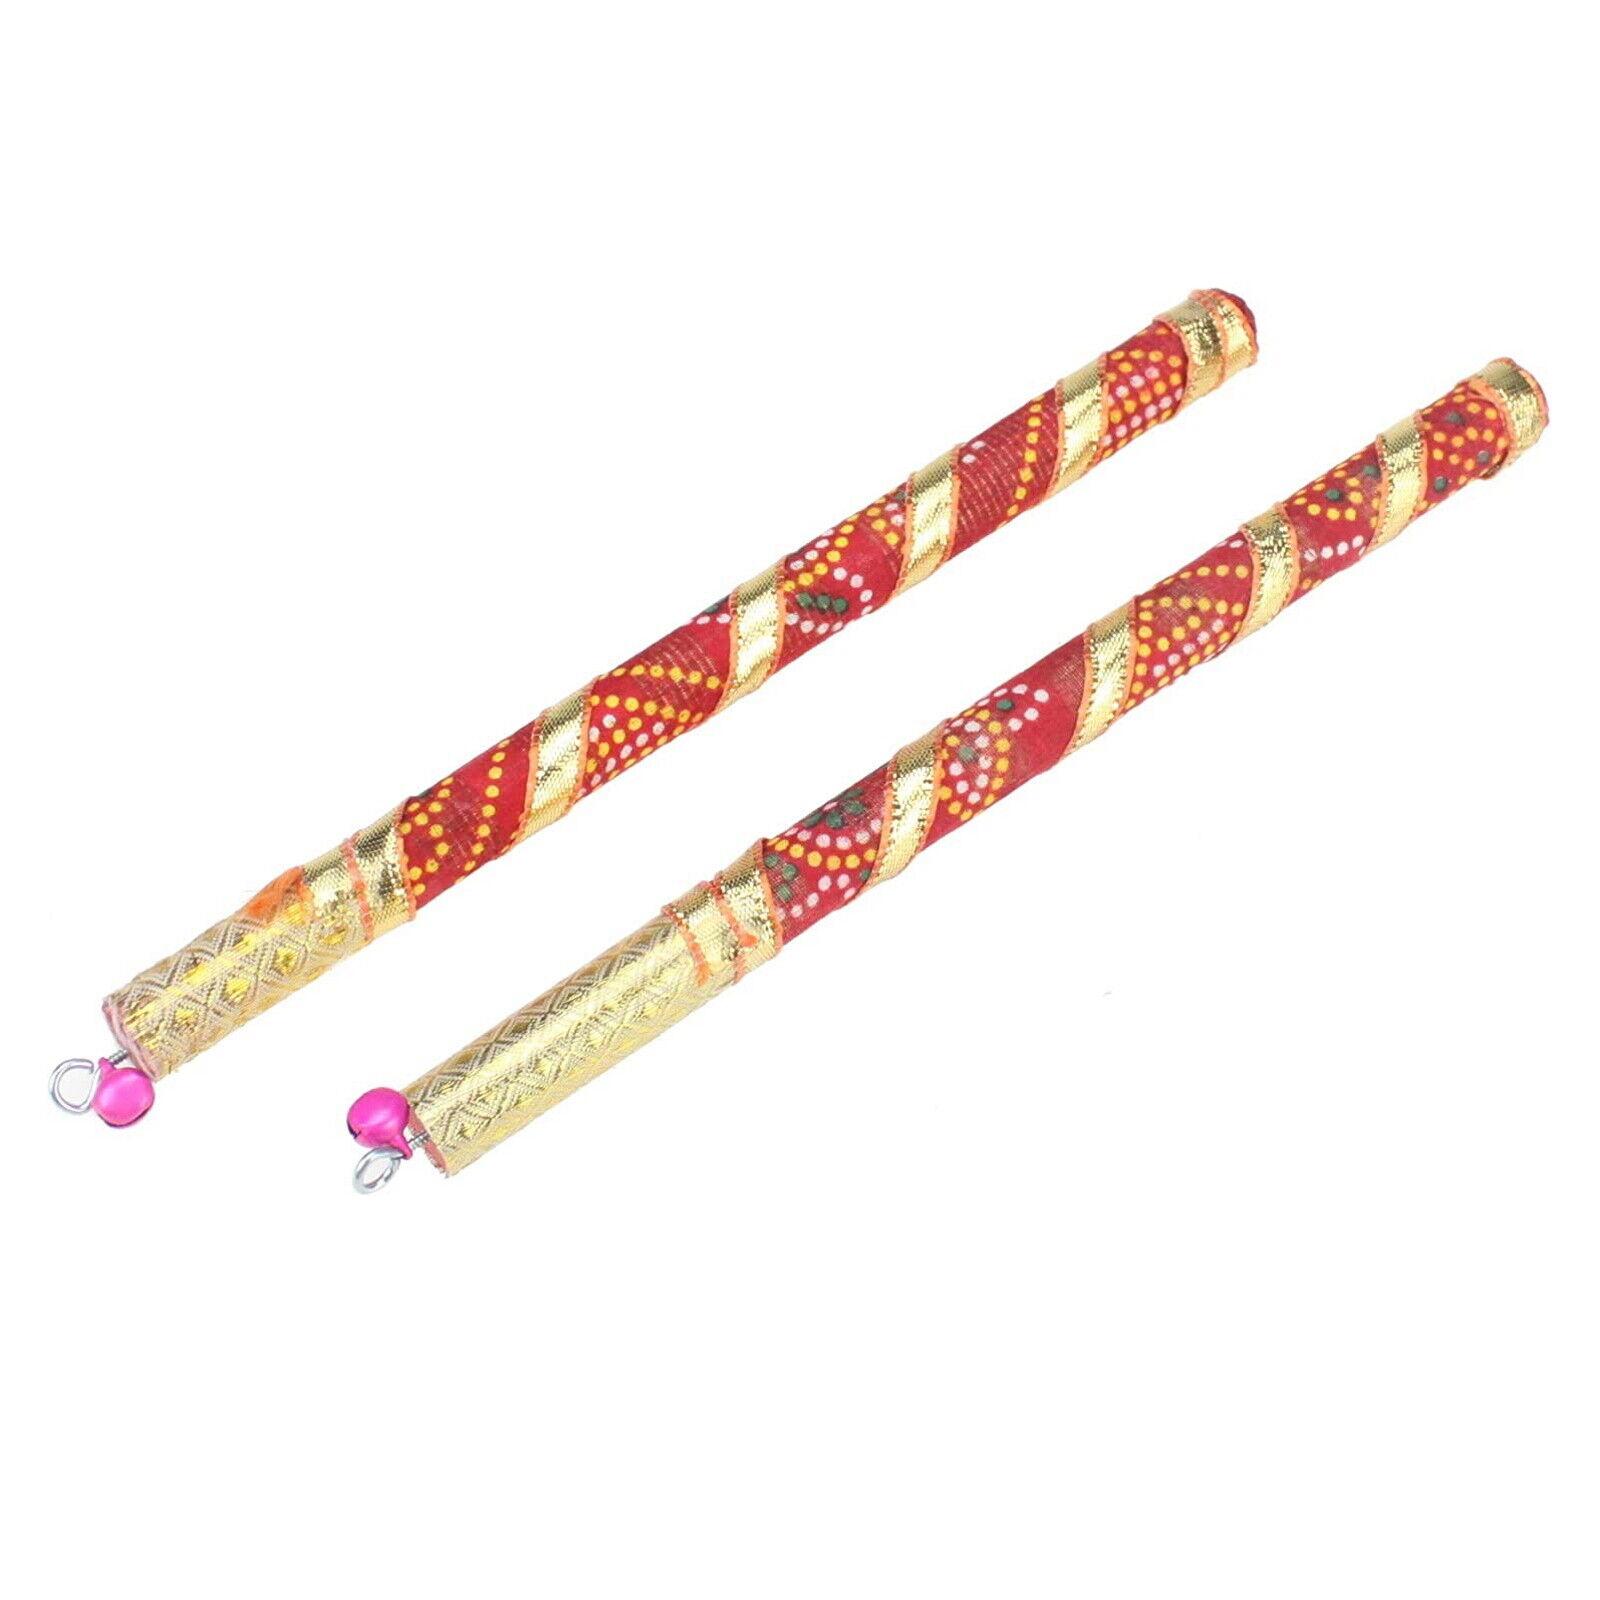 Avanti Creation Stainless Steel Bearing Dandiya Sticks for Dance Garba  Sticks for Navratri Celebration 9 Inches Small Size (Pack of 2 Pair) :  Amazon.in: Home & Kitchen